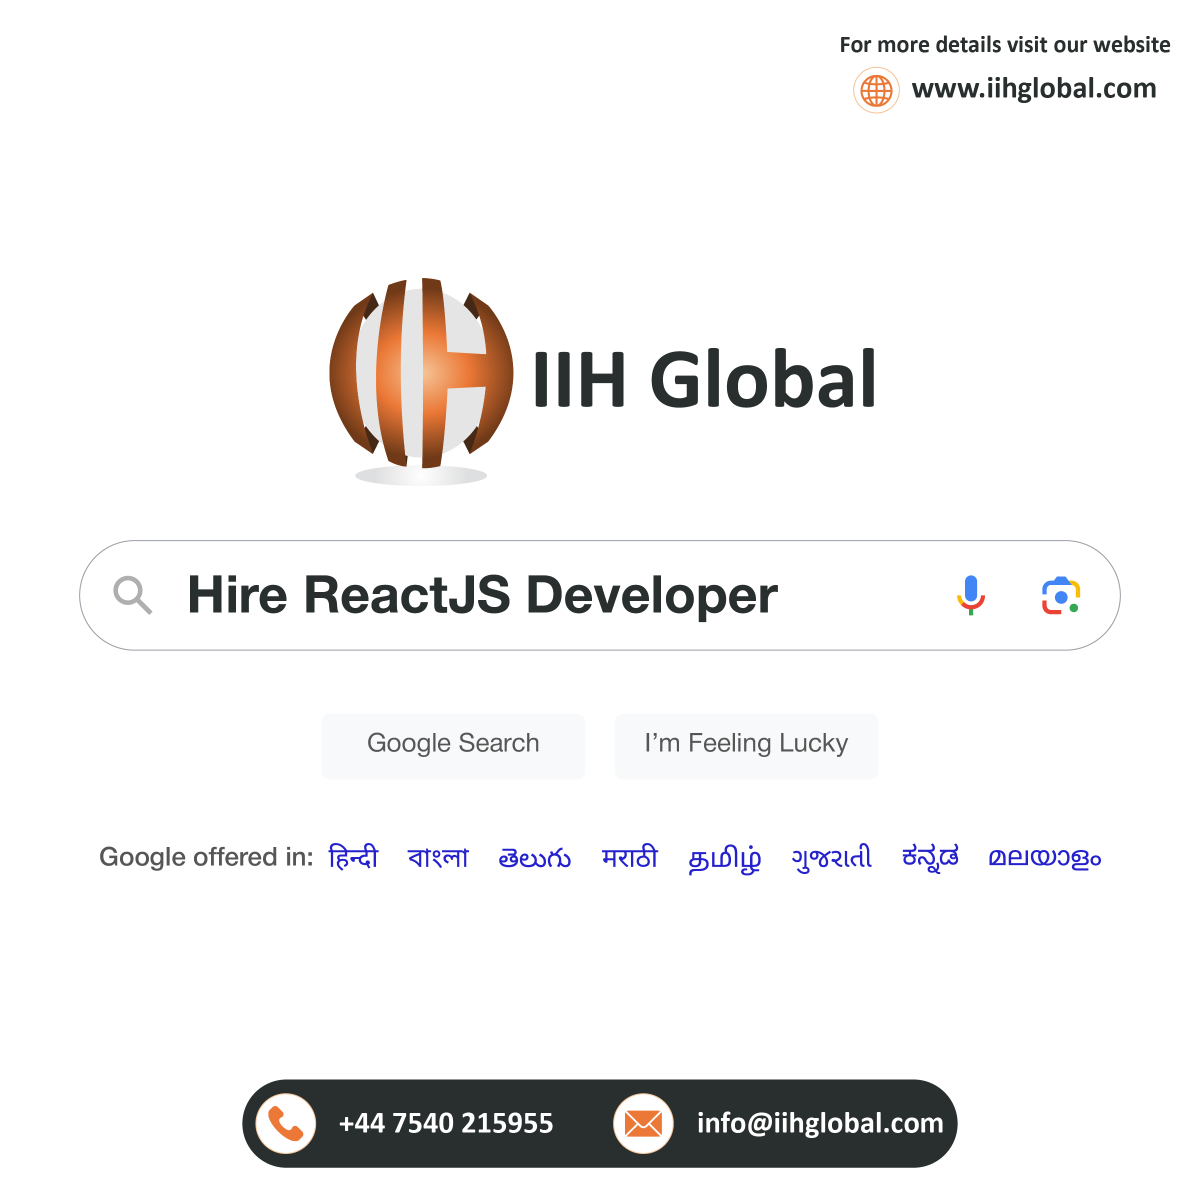 Ready to elevate your web development game? Hire a React.js developer today and unlock the power of lightning-fast rendering, reusable components, and sleek UI design. Let's bring your digital vision to life!

🎯iihglobal.com

#IIHGlobal #ReactJS #ReactJsDeveloper #Hire